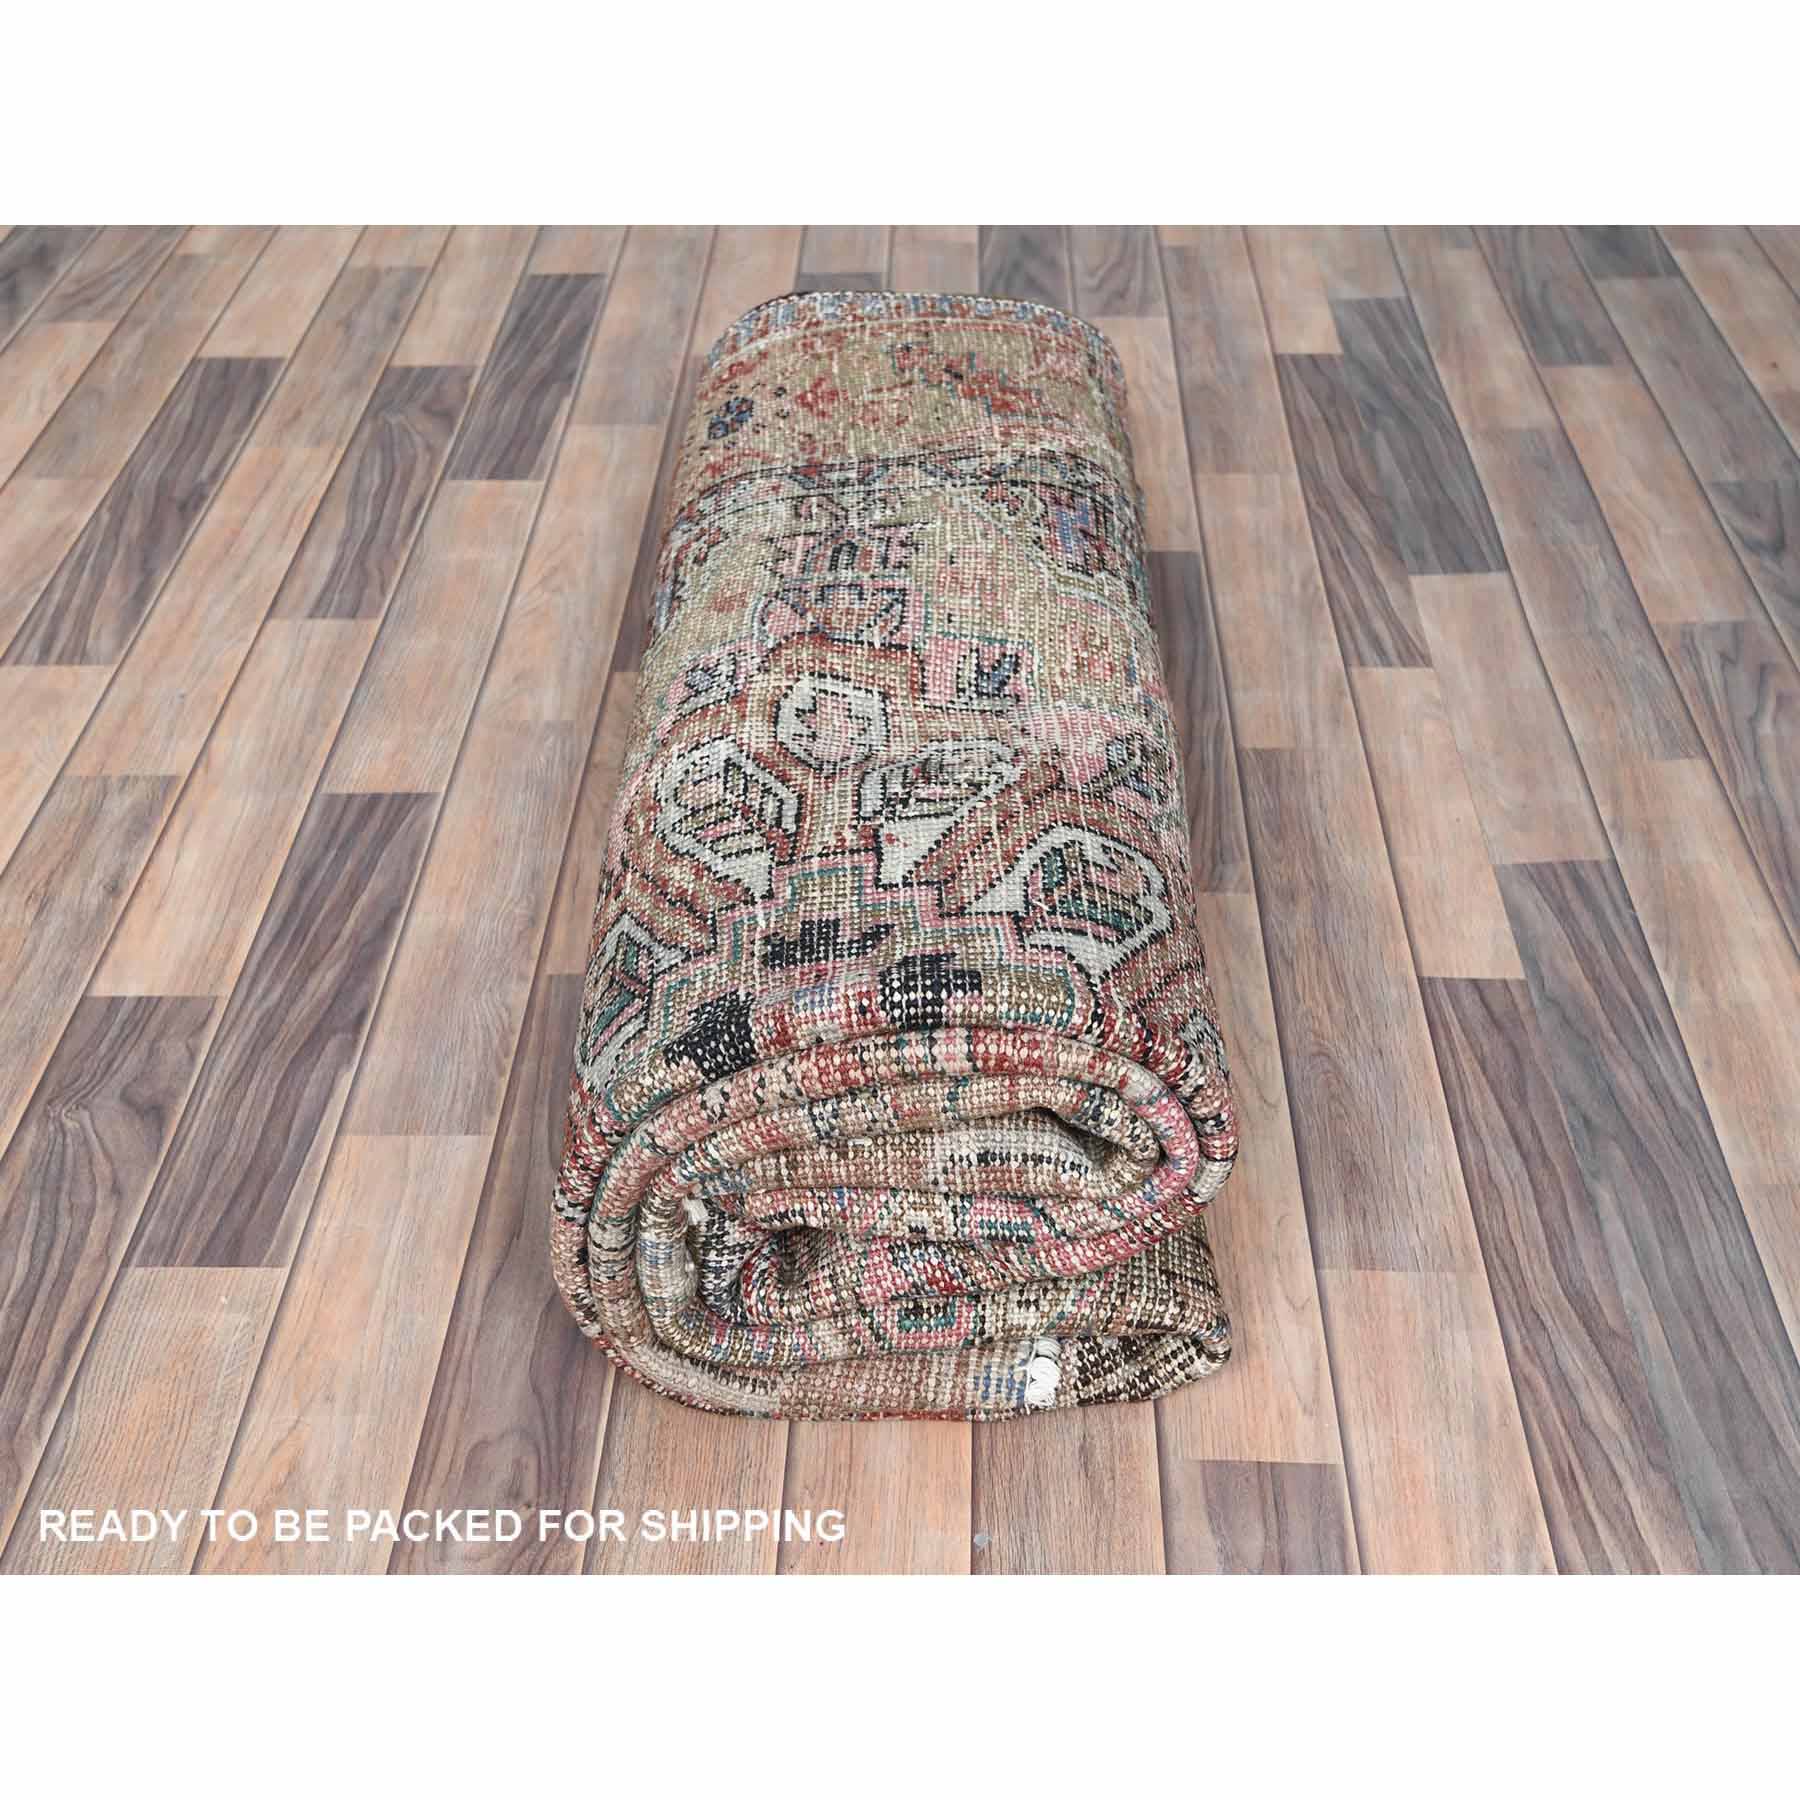 Overdyed-Vintage-Hand-Knotted-Rug-411880